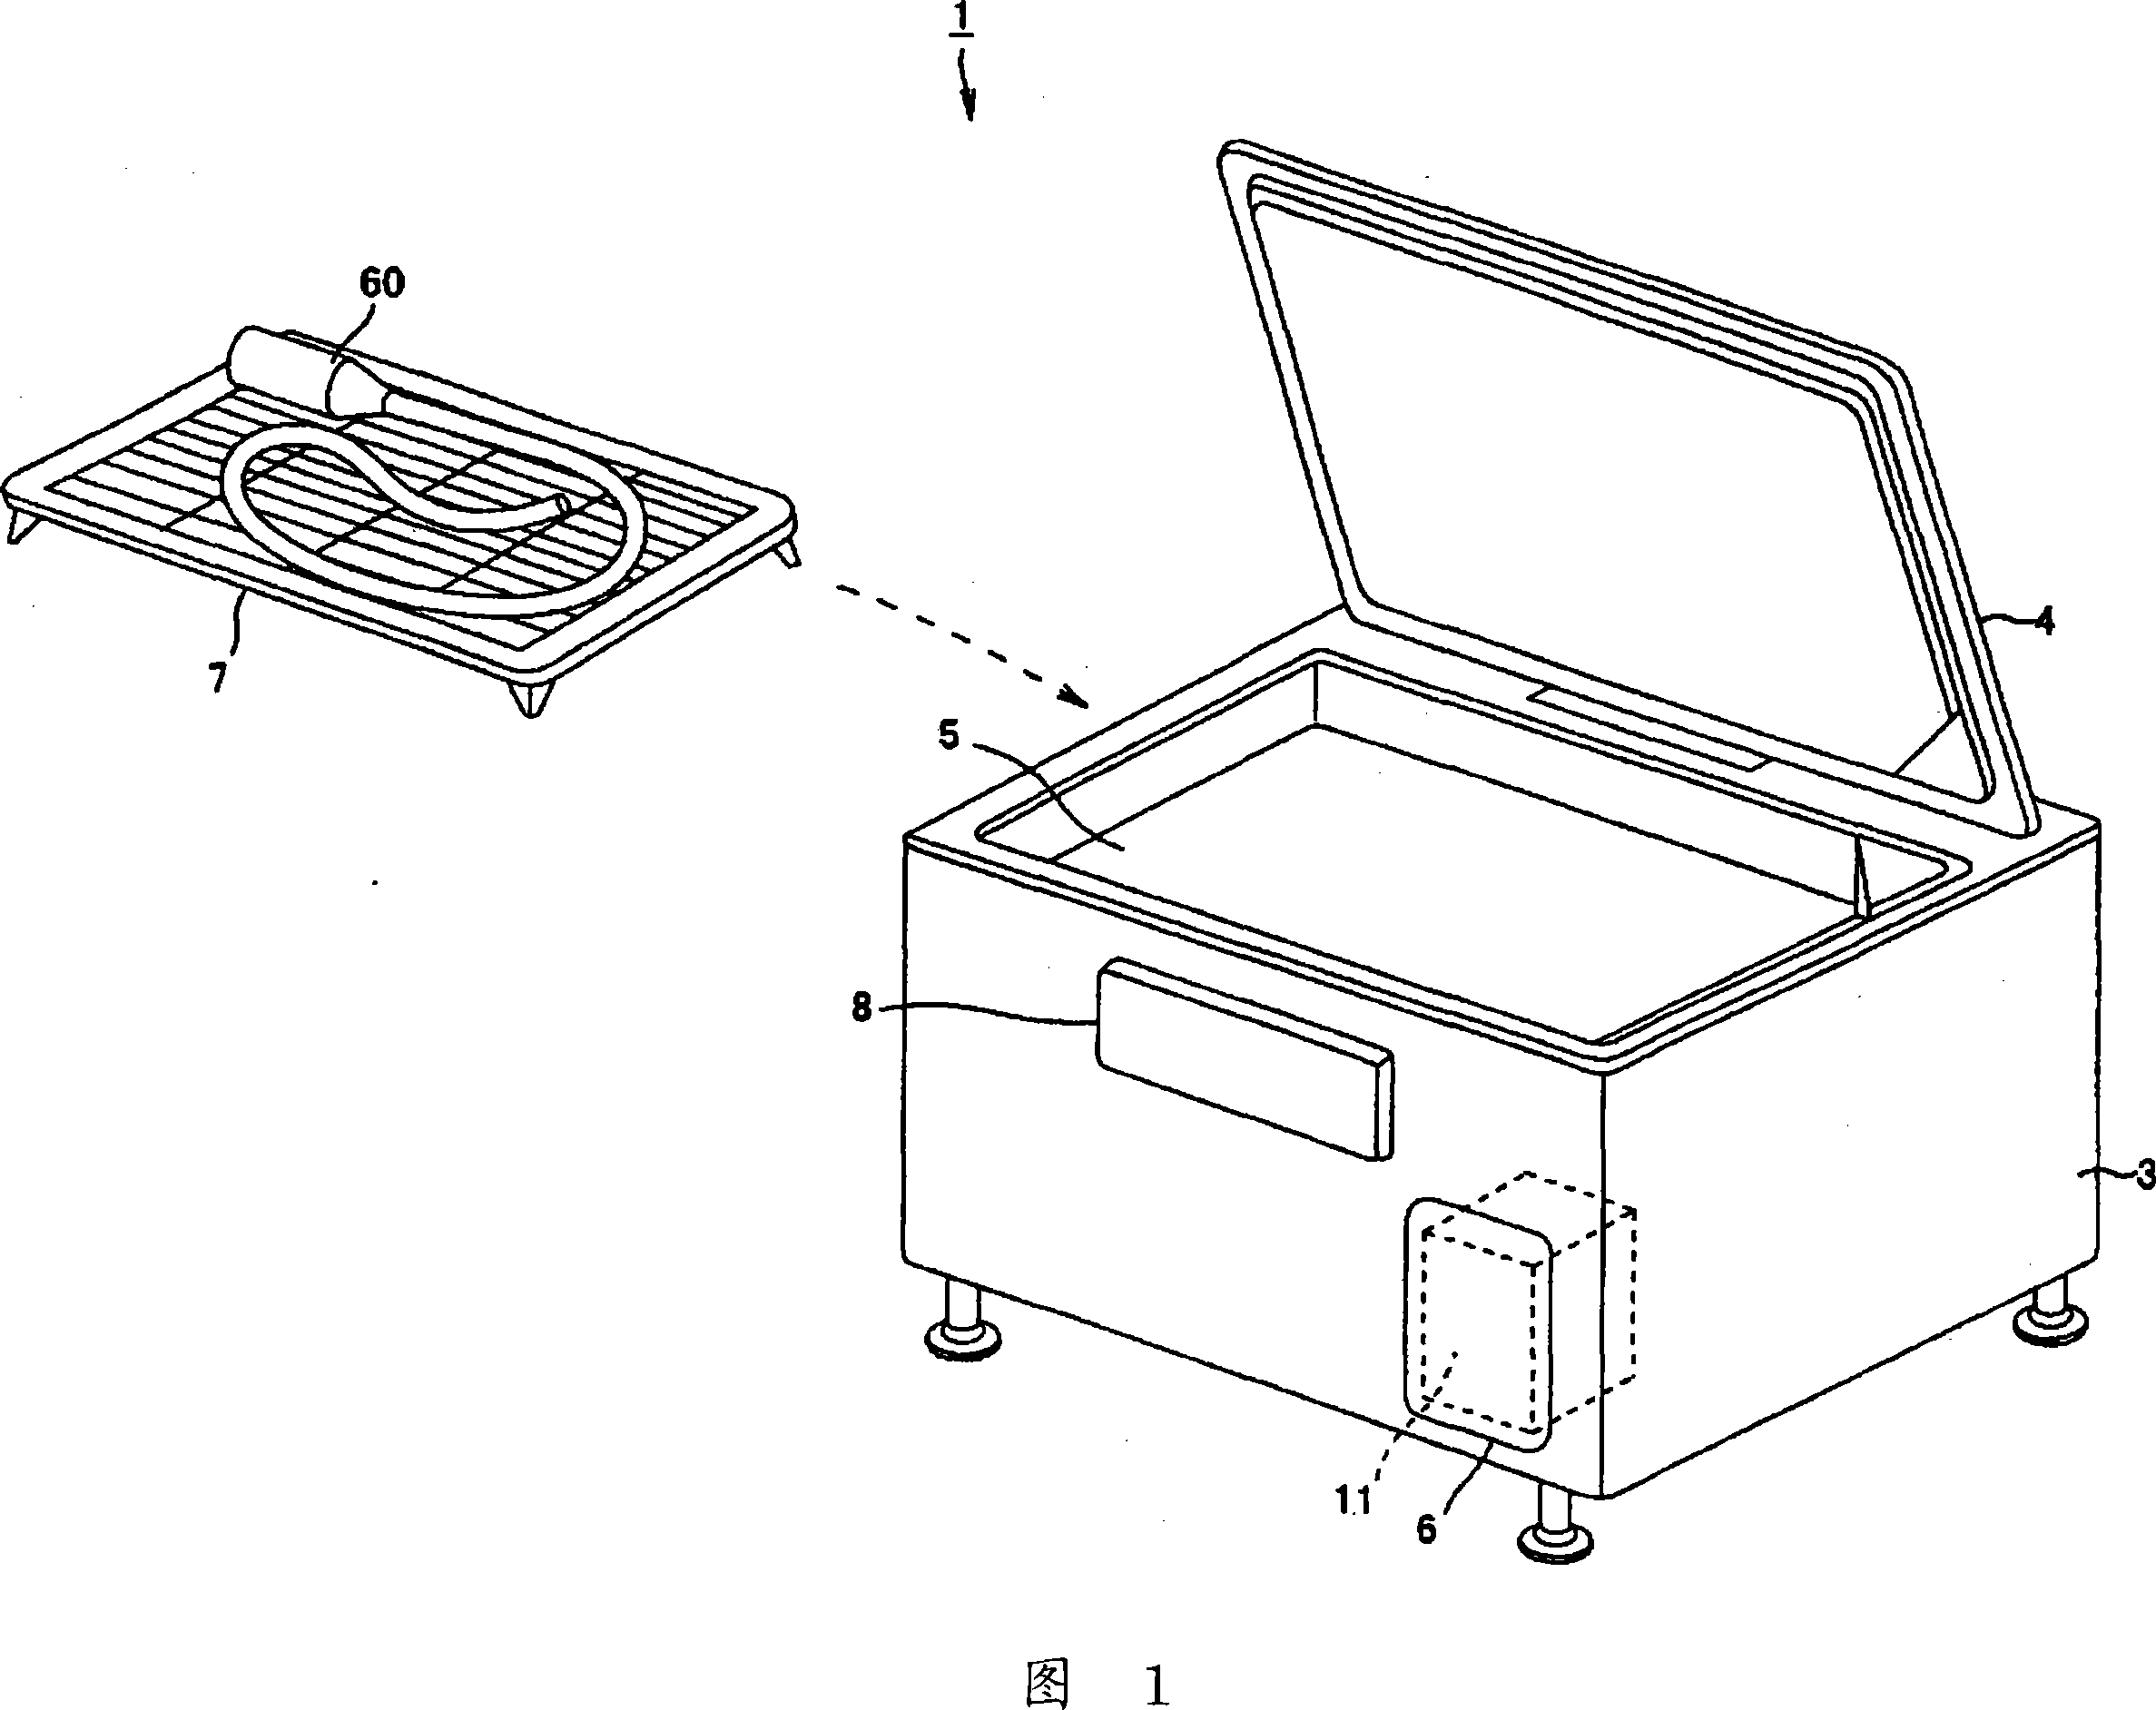 Endoscope washer disinfector and method of controlling the supply of the cleaning and disinfecting agent used thereby